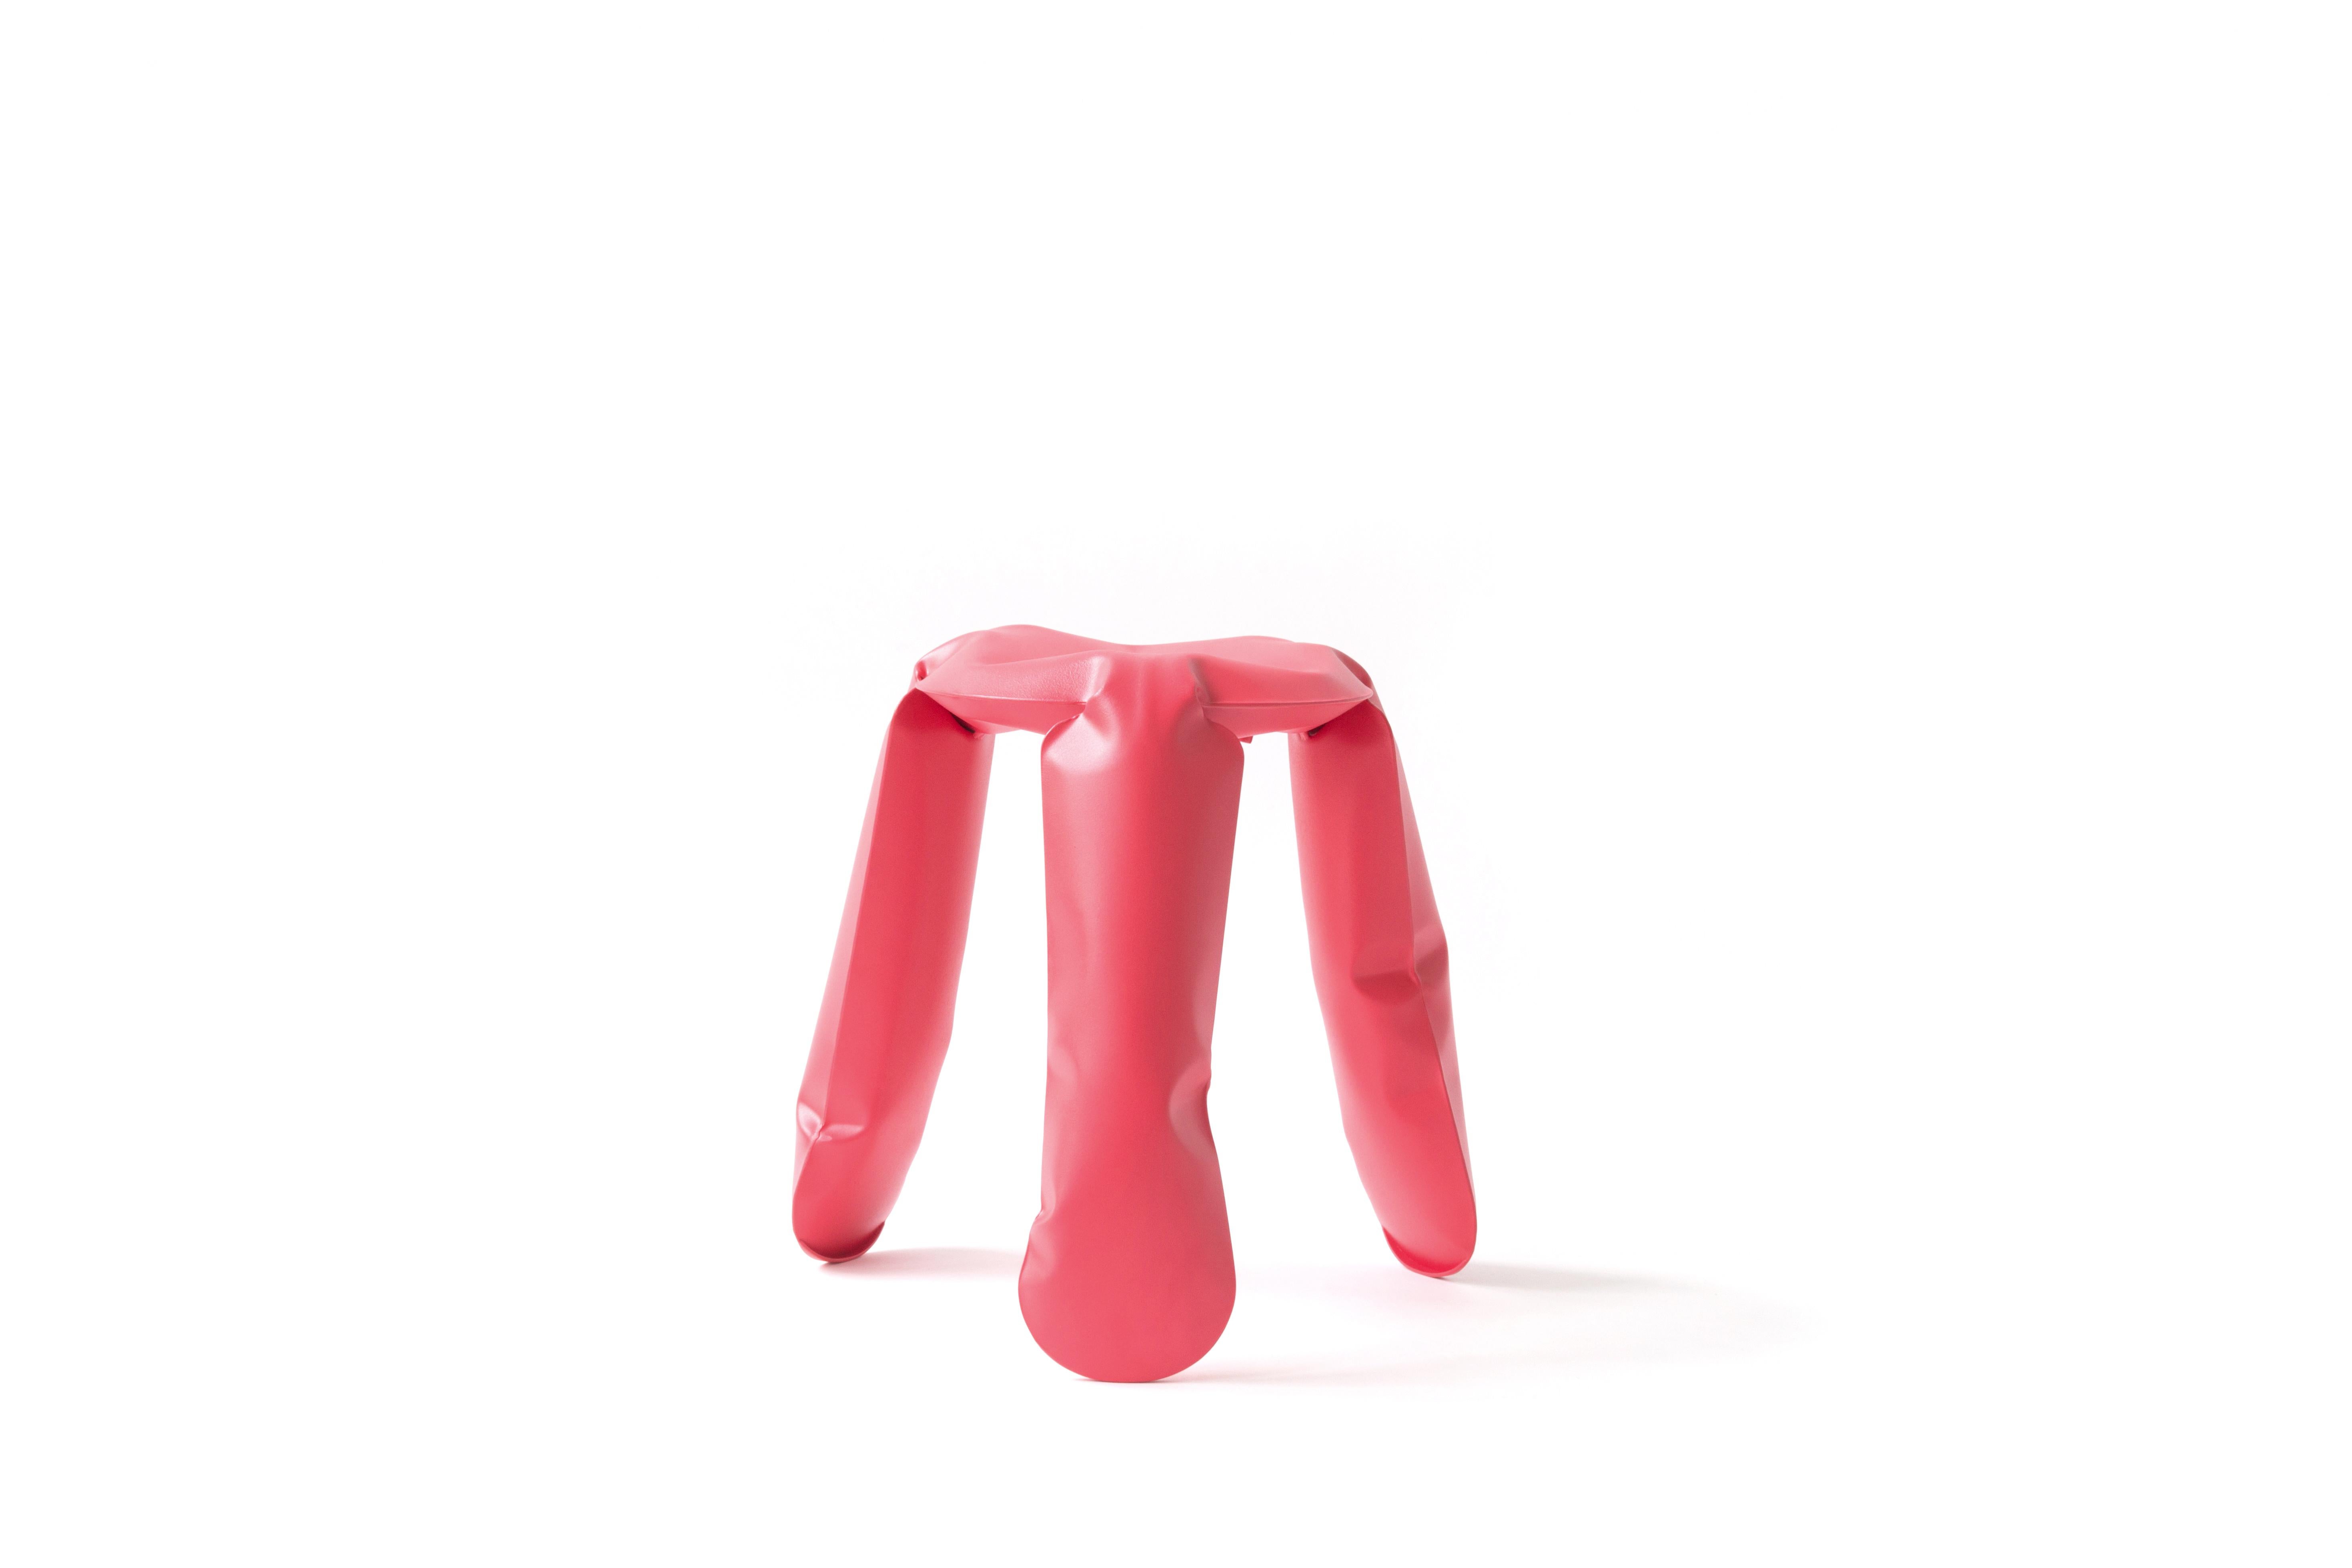 Strawberry Red Mini Plopp stool by Zieta
Dimensions: D 25 x H 38 cm 
Material: Carbon steel. 
Finish: Powder-coated.
Available in colors: Water Blue, Yellow Glossy, Flamed Gold, and Deep Space Blue. Available in Stainless Steel, Aluminum, and Carbon